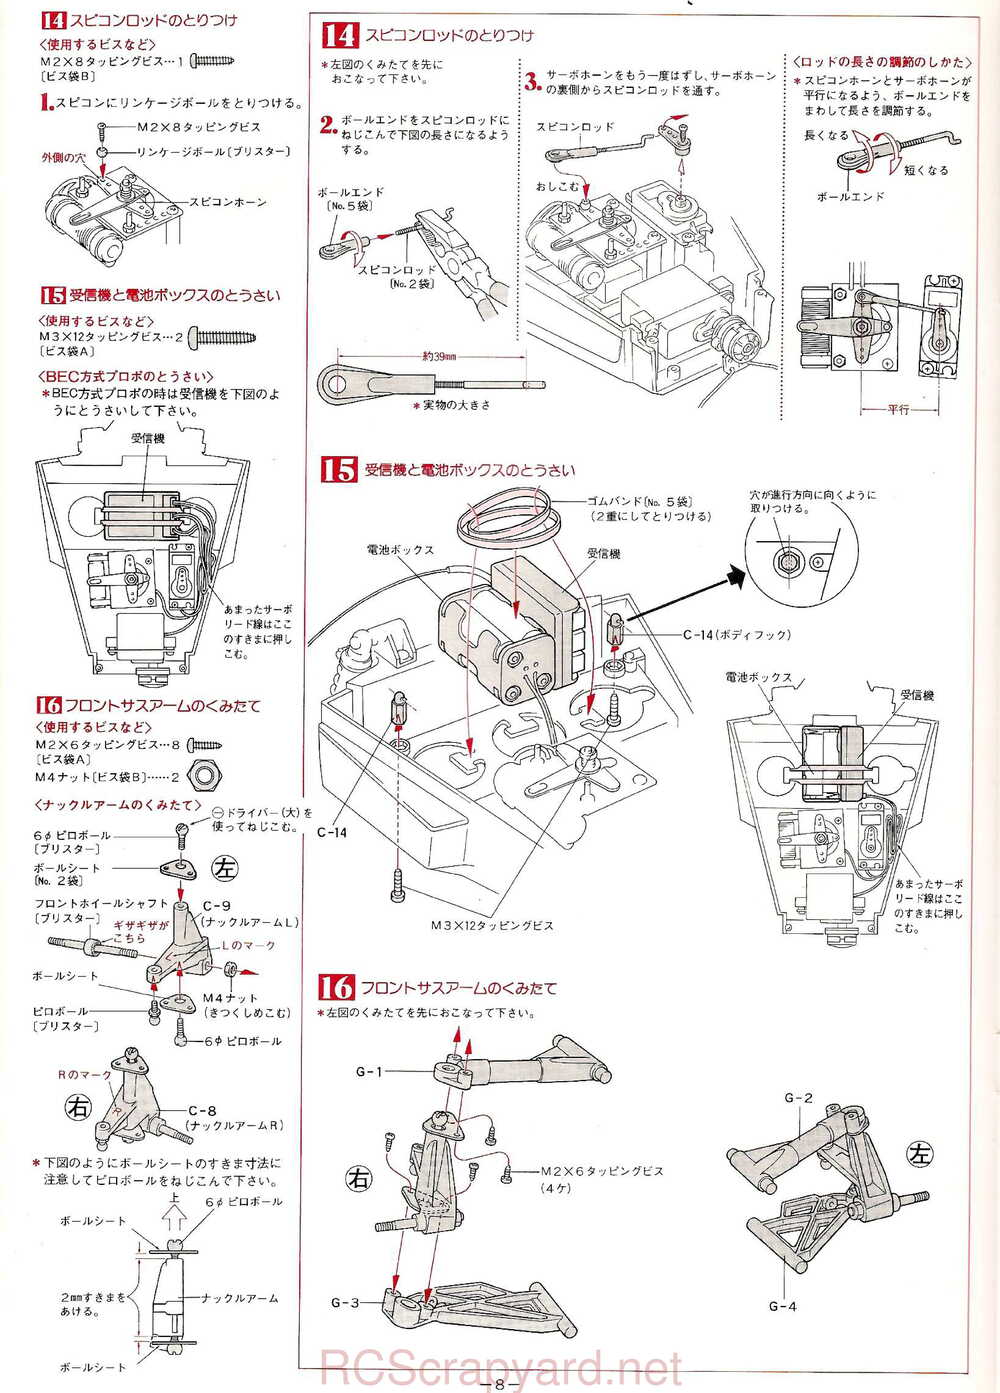 Kyosho - 3084 - Cosmo - Manual - Page 08